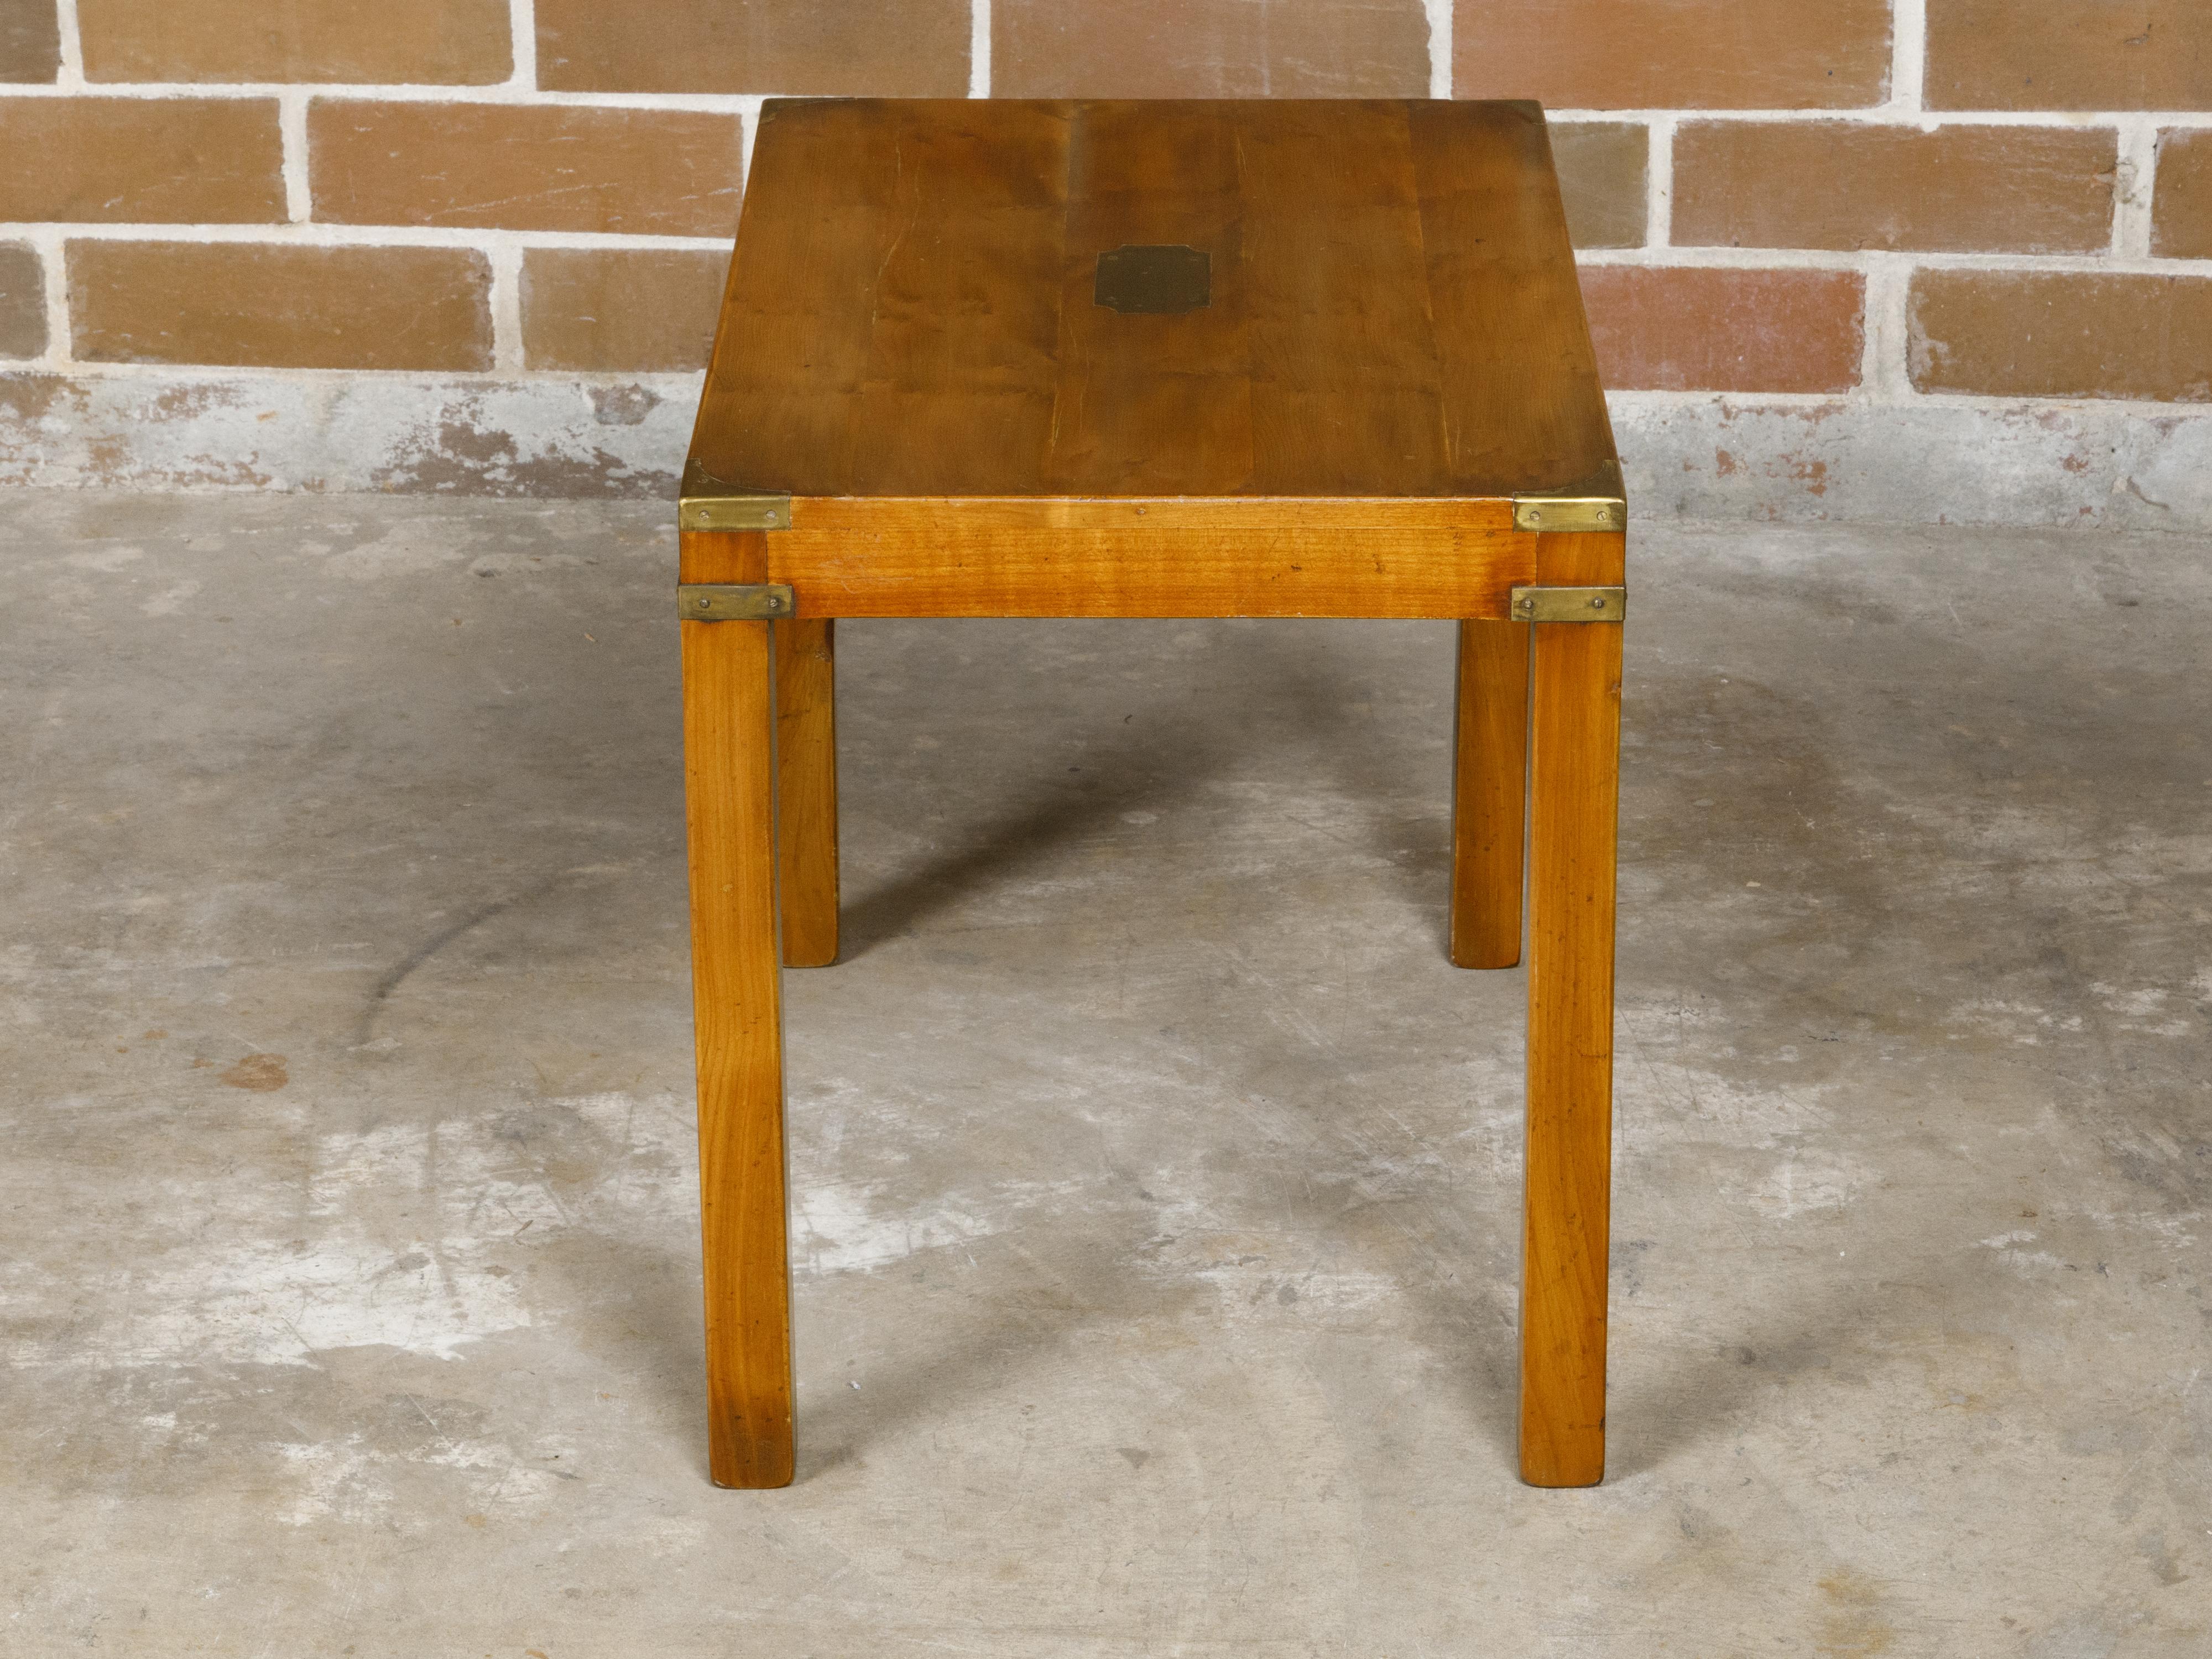 English Campaign Yew Wood 1920s Side Table with Brass Accents and Straight Legs For Sale 7